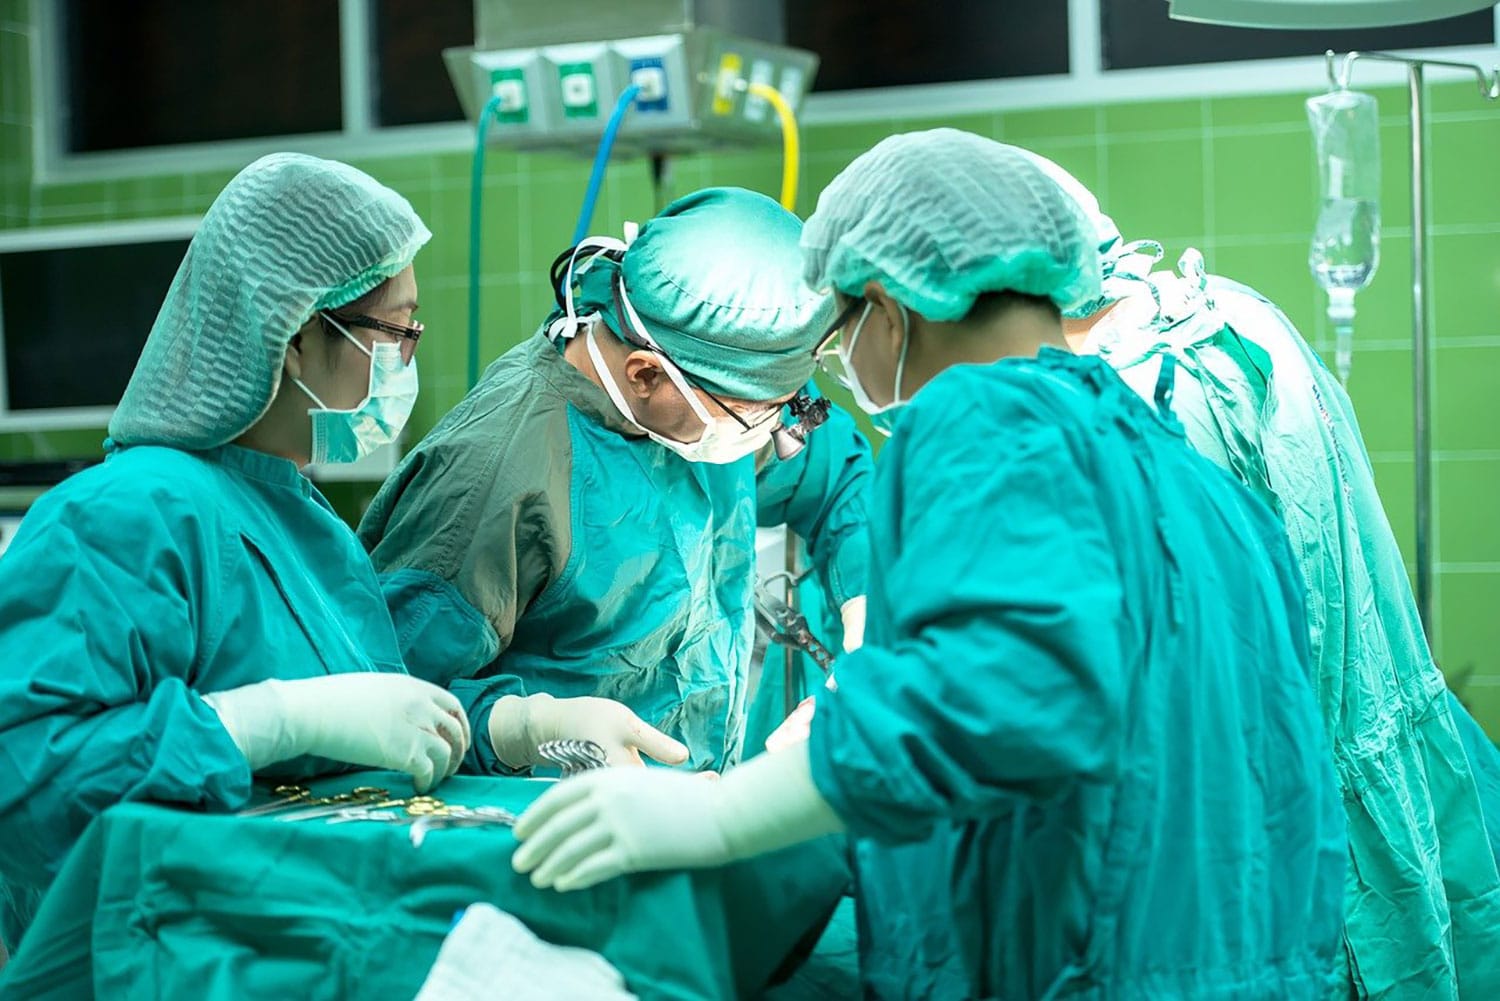 Image showing doctors performing surgery